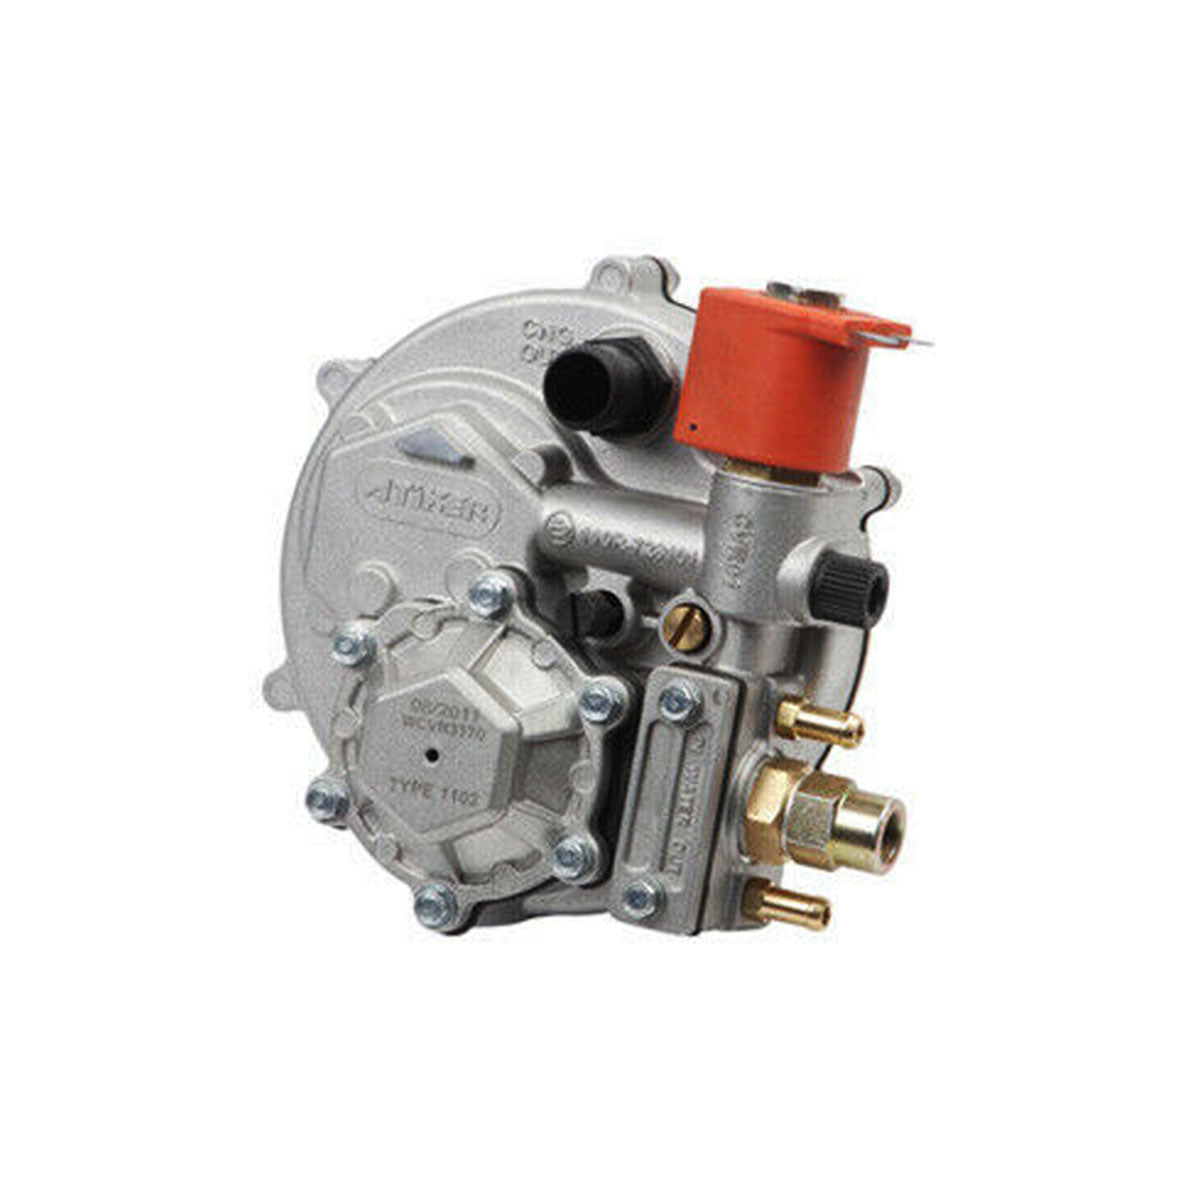 CNG Reducer ATIKER CVR01 100kW/135 BHP for Carburettor or Single Point System